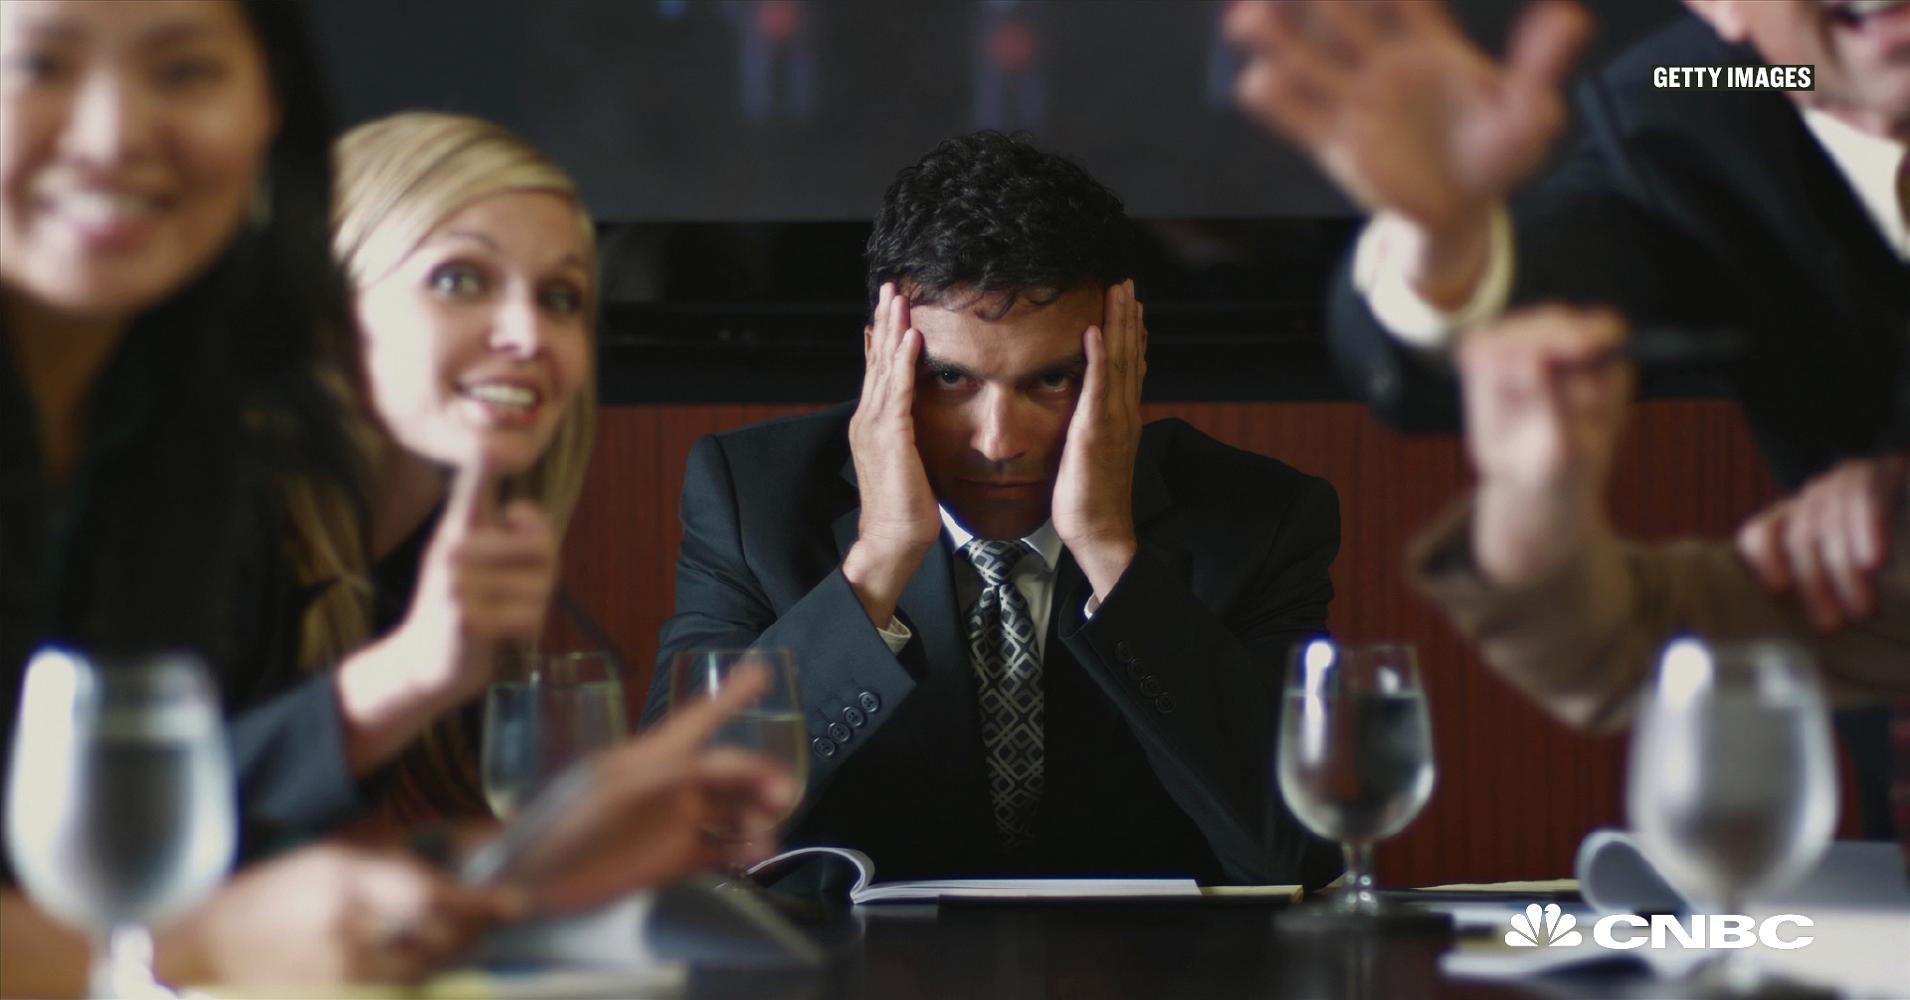 5 Tips for Dealing With Difficult People at Work